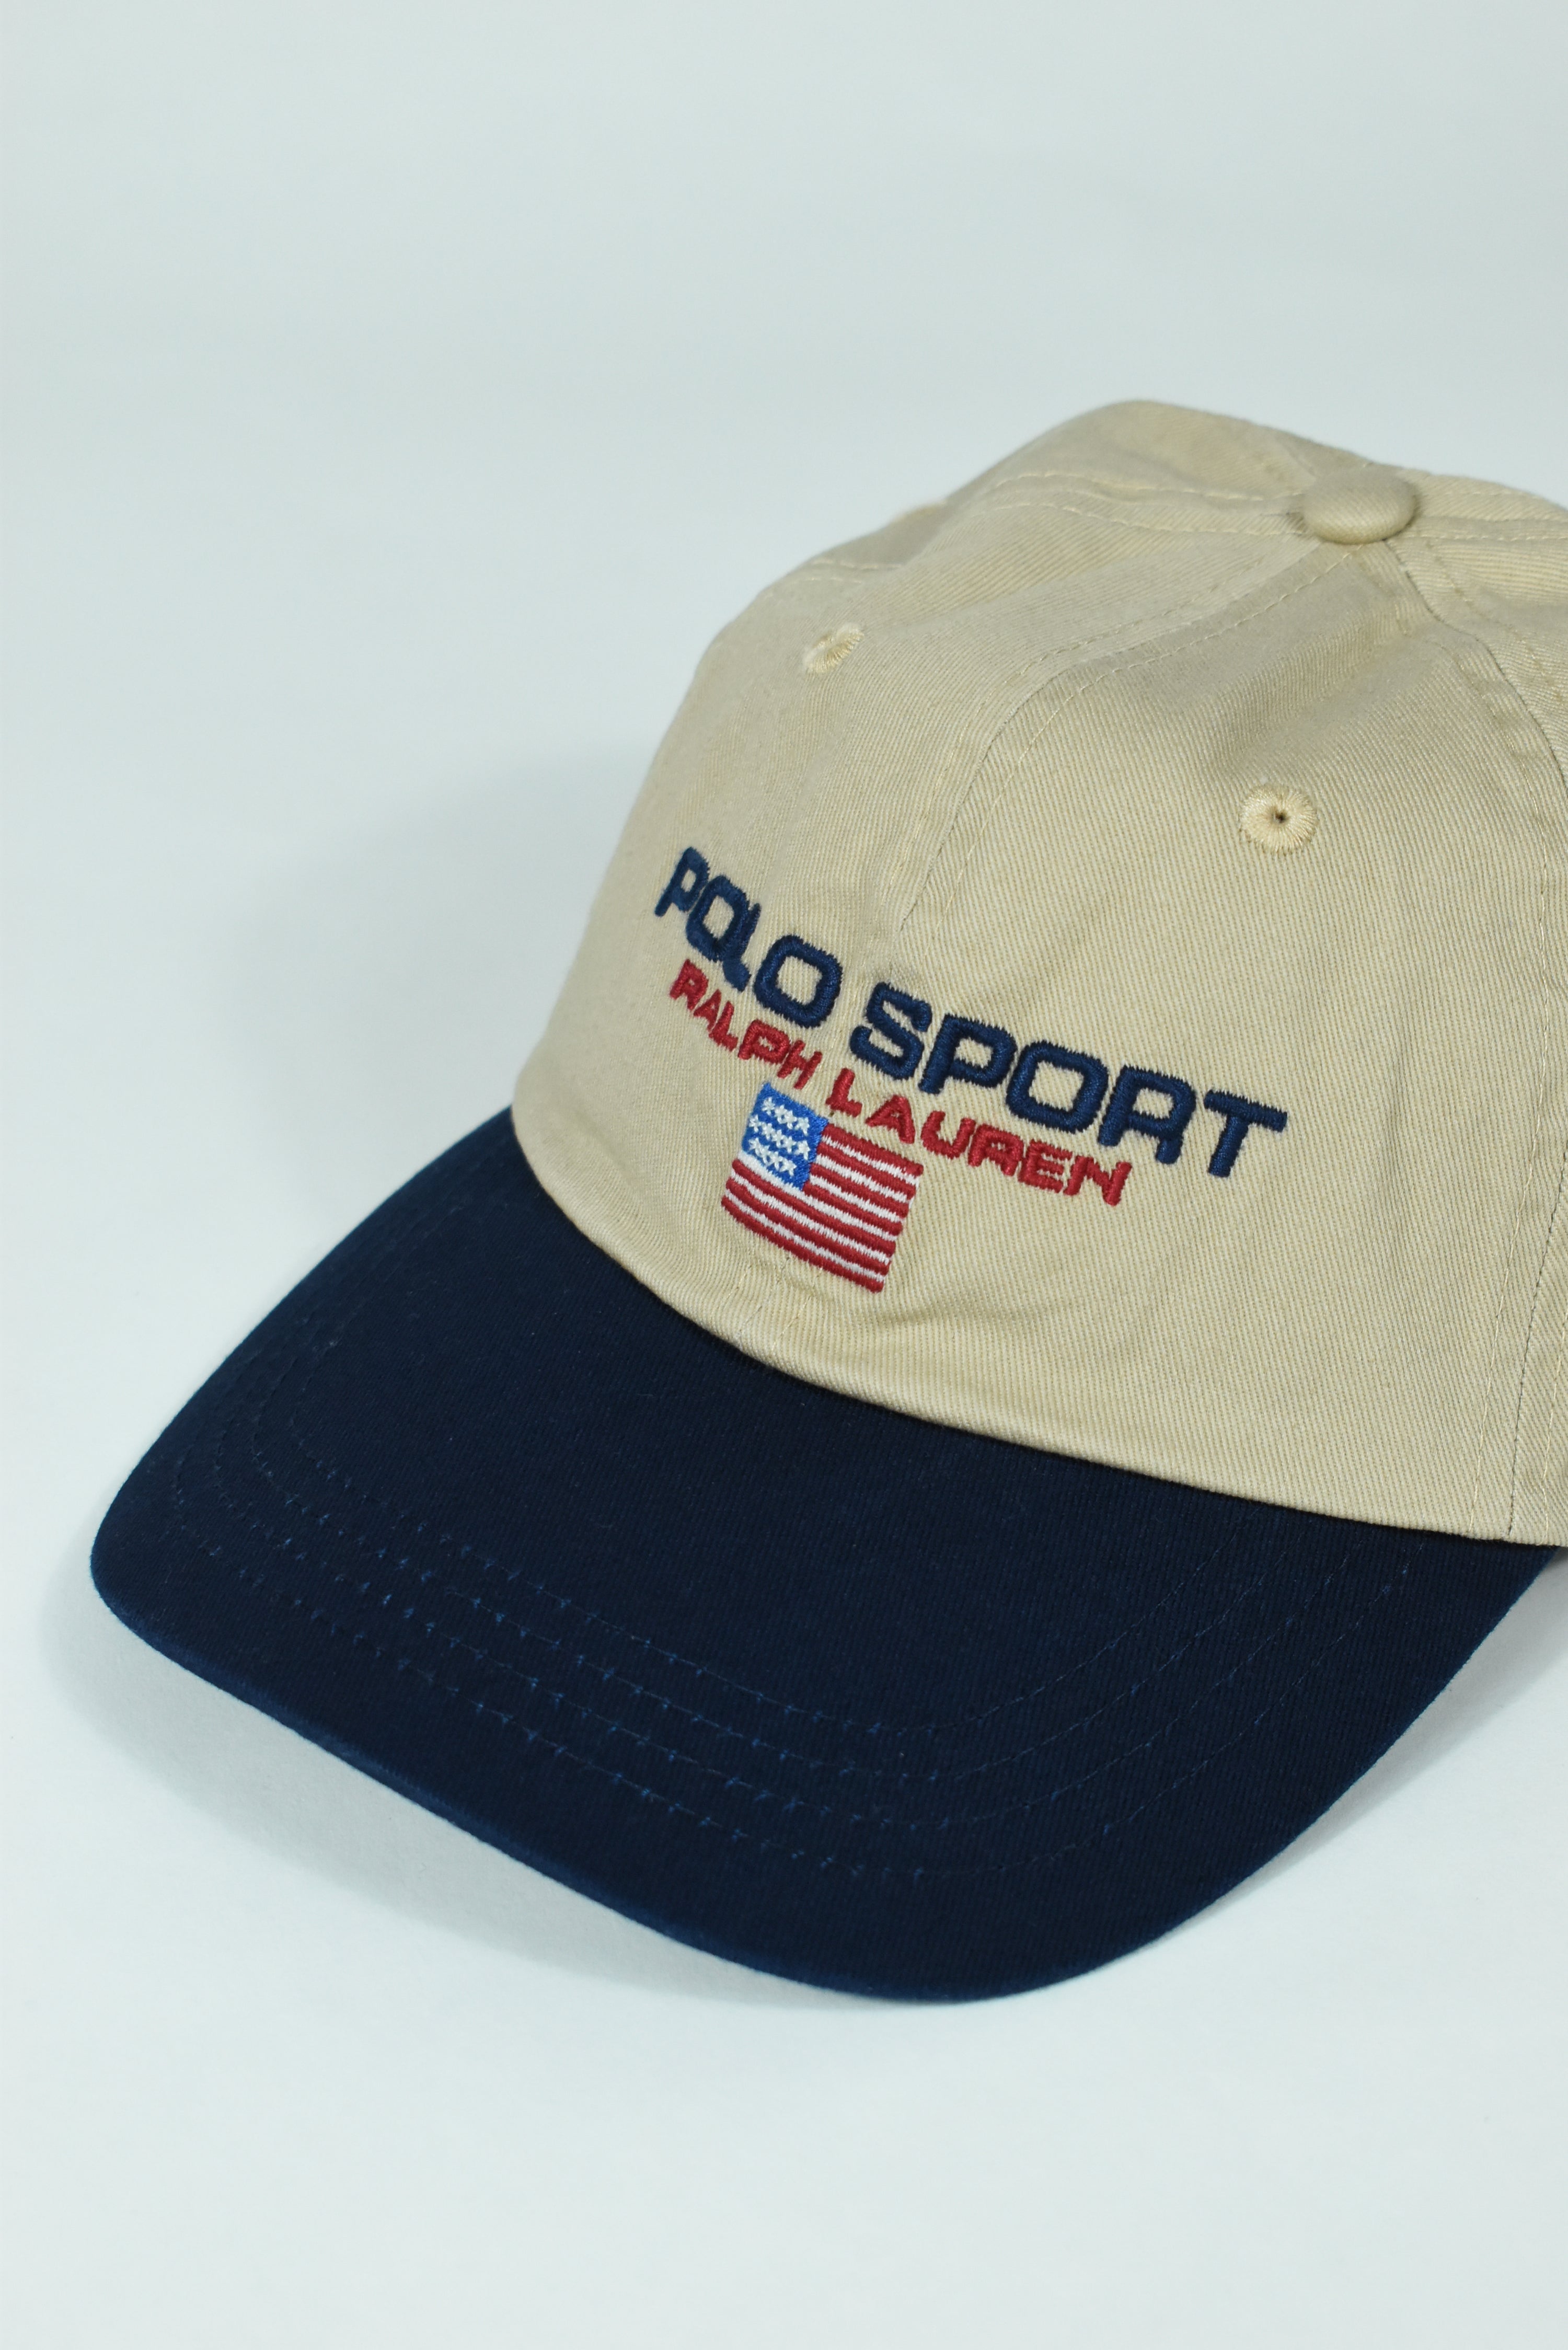 New Beige/Navy RL Polo Sport Embroidery Cap